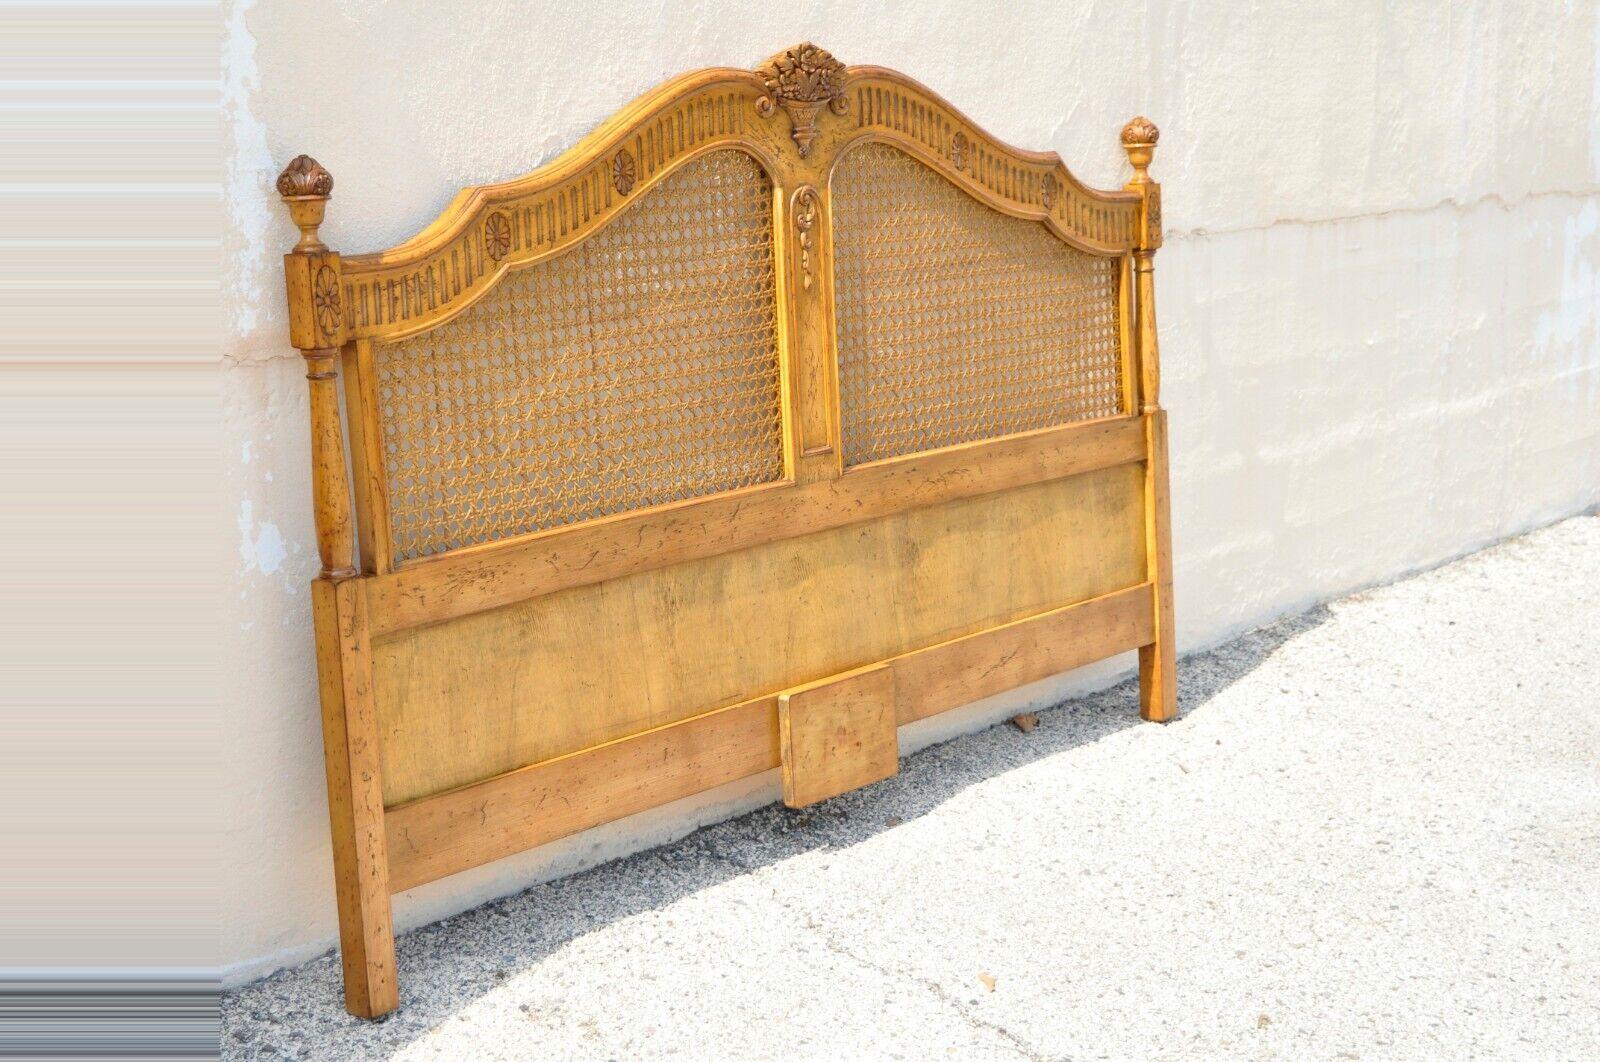 Vintage French Country Provincial Style cane Panel king size bed headboard attr. Karges. Item features cane panels, solid wood construction, distressed finish, nicely carved details, very nice vintage item, quality American craftsmanship, great